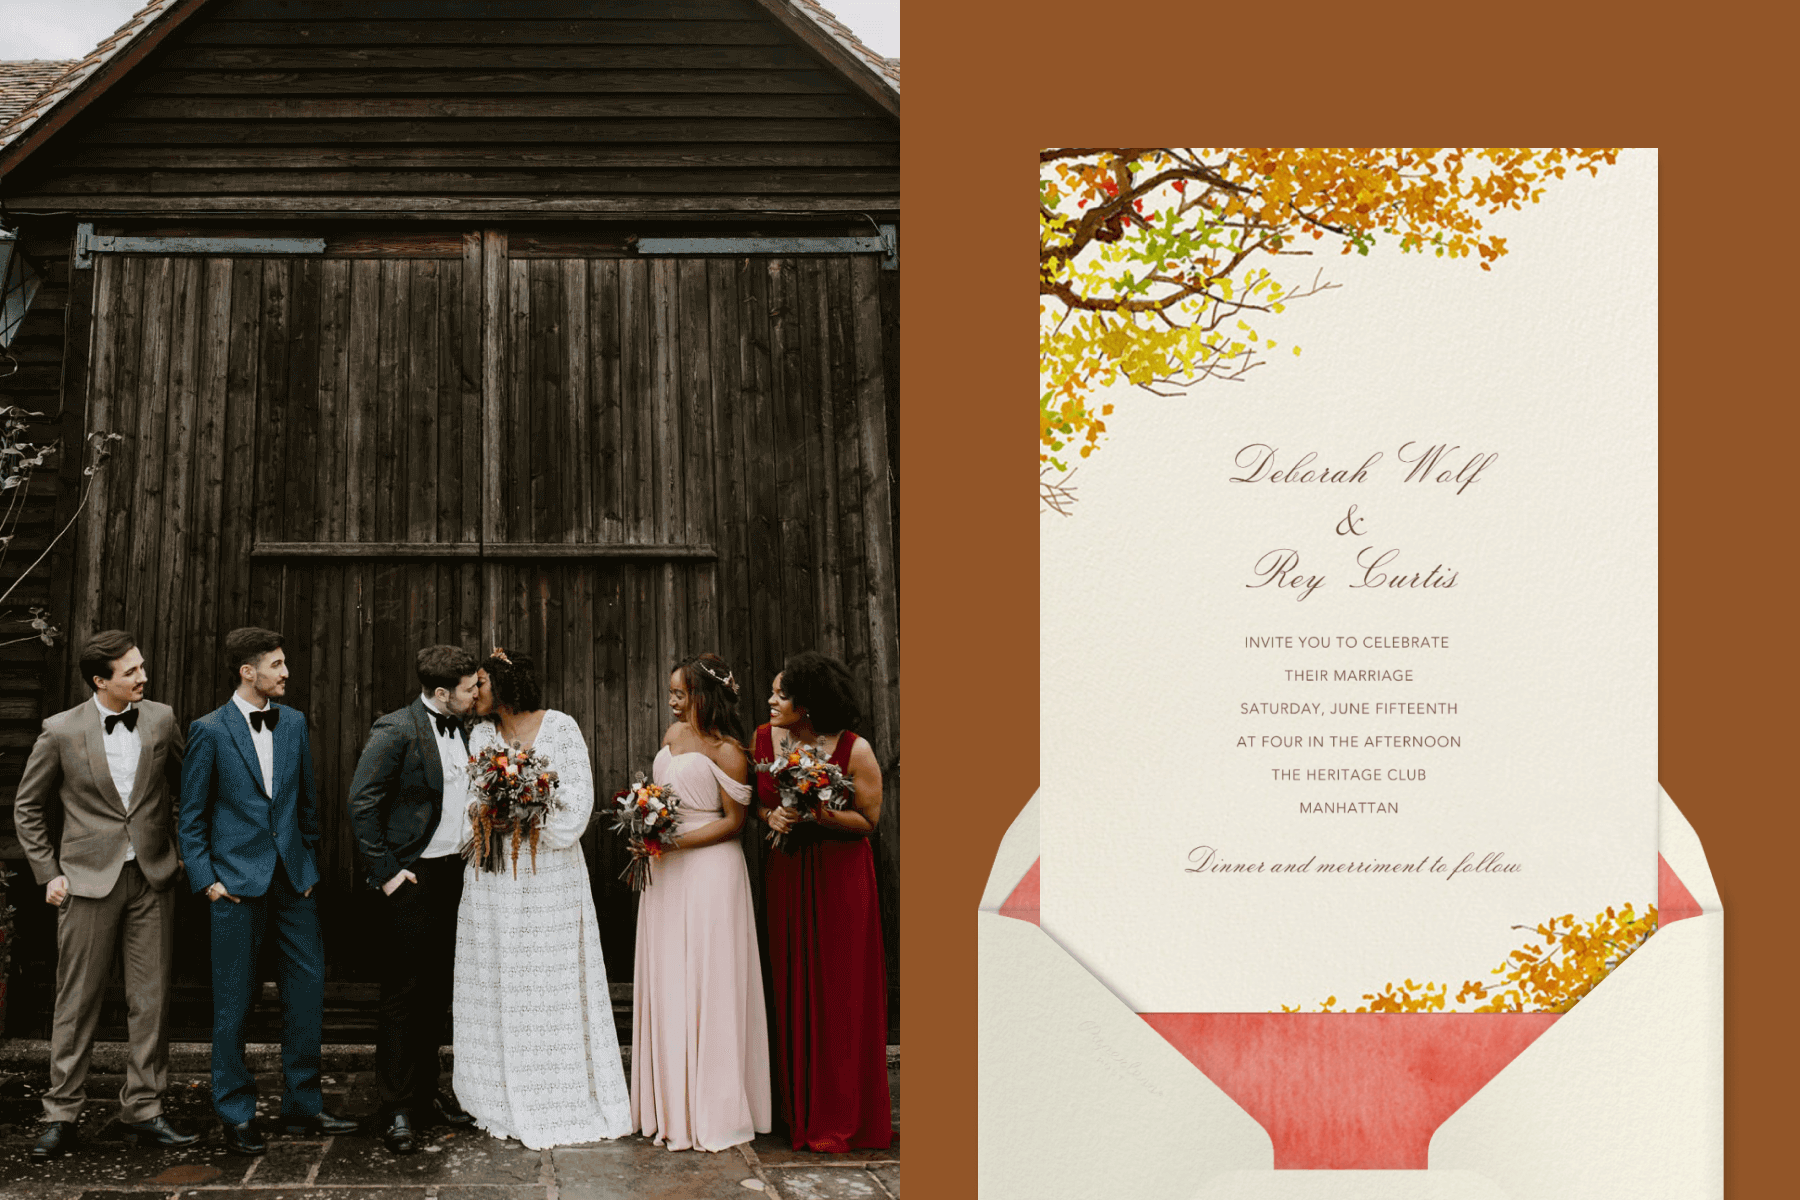 Left: A man and woman kiss in front of a barn while their wedding party members look on. Right: A wedding invitation with autumnal leaves on a tree branch in the upper left corner.